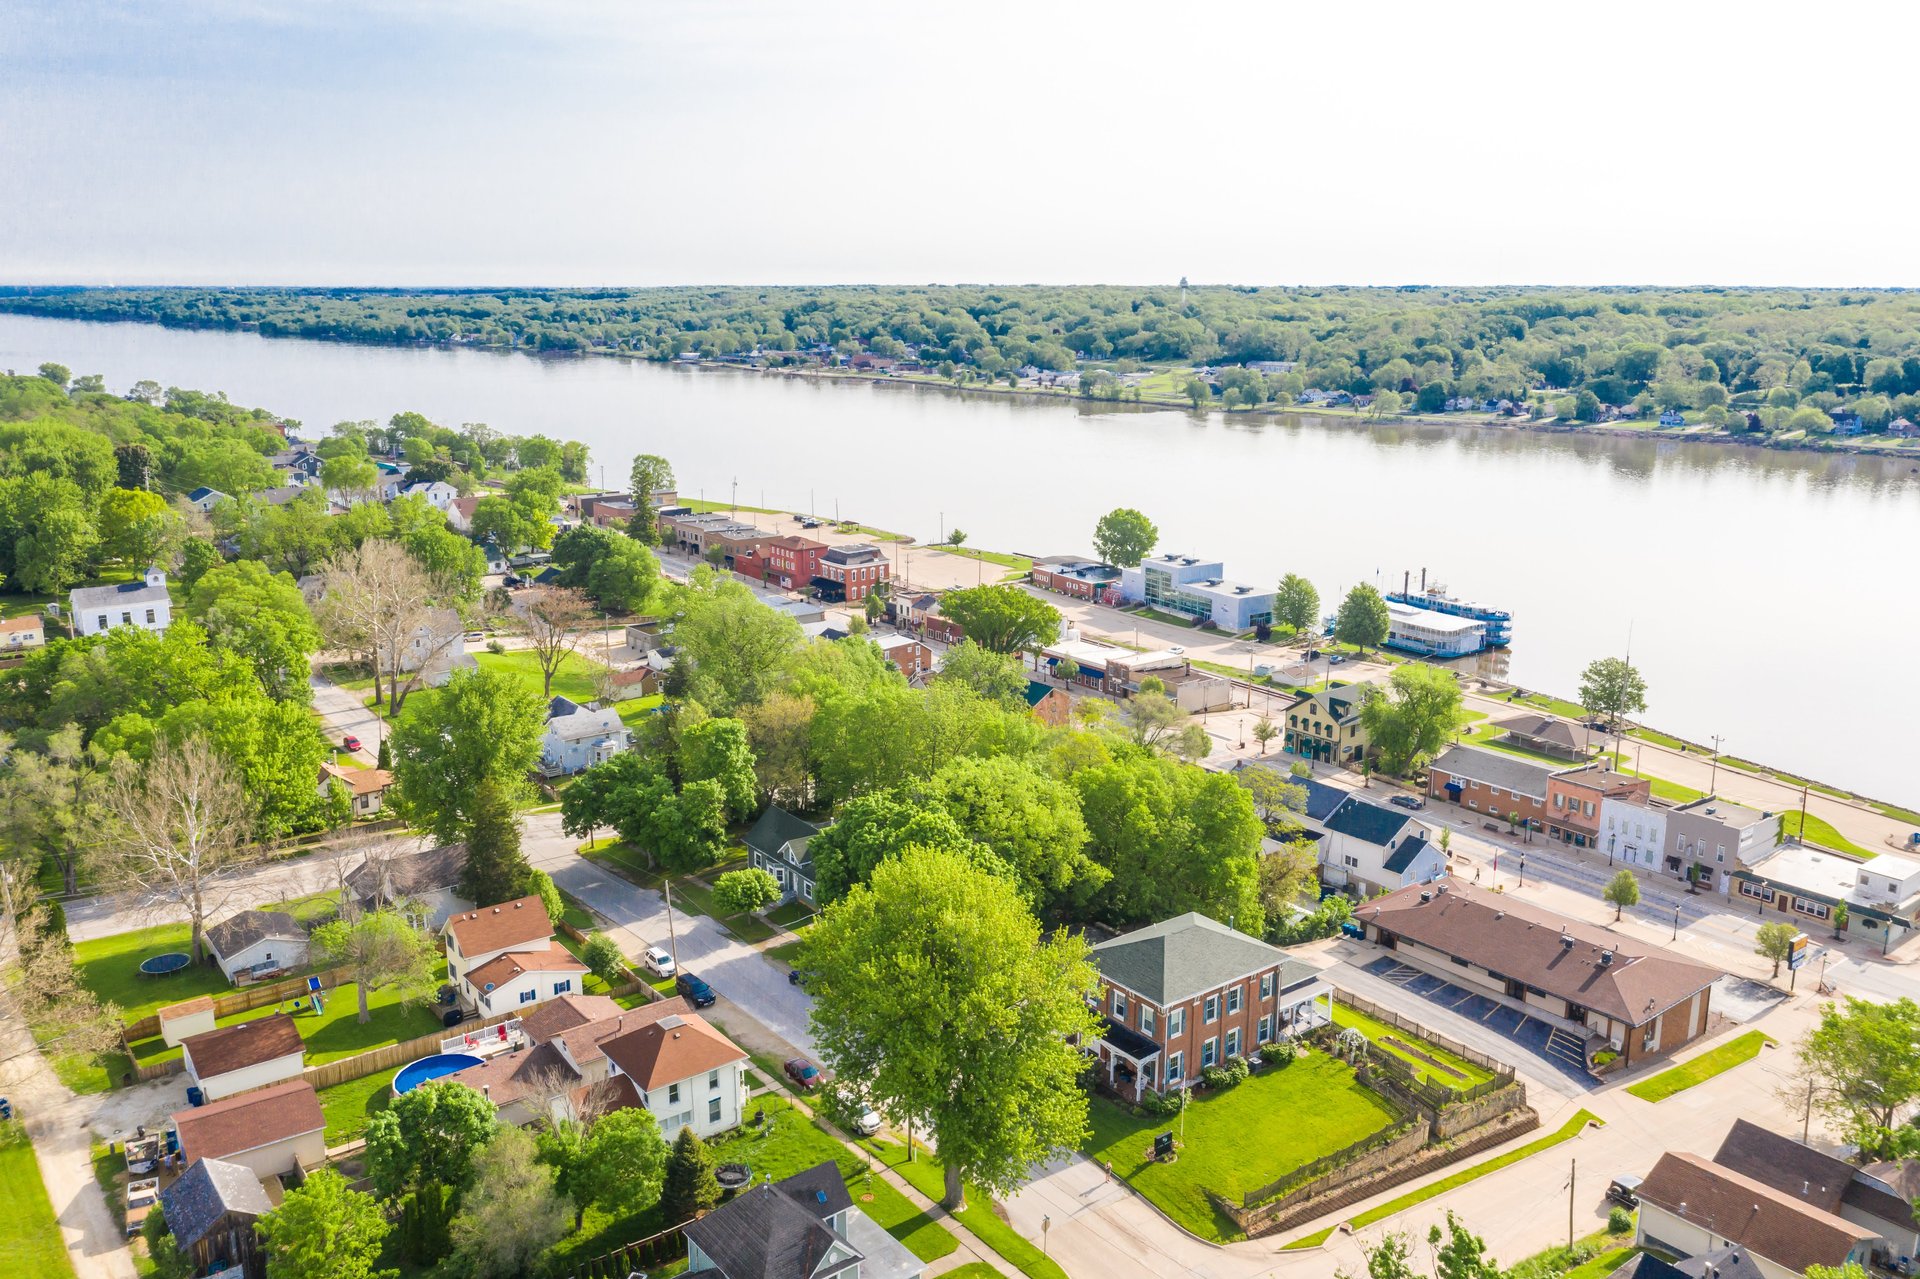 An aerial view of a charming community on the shores of a wide river.